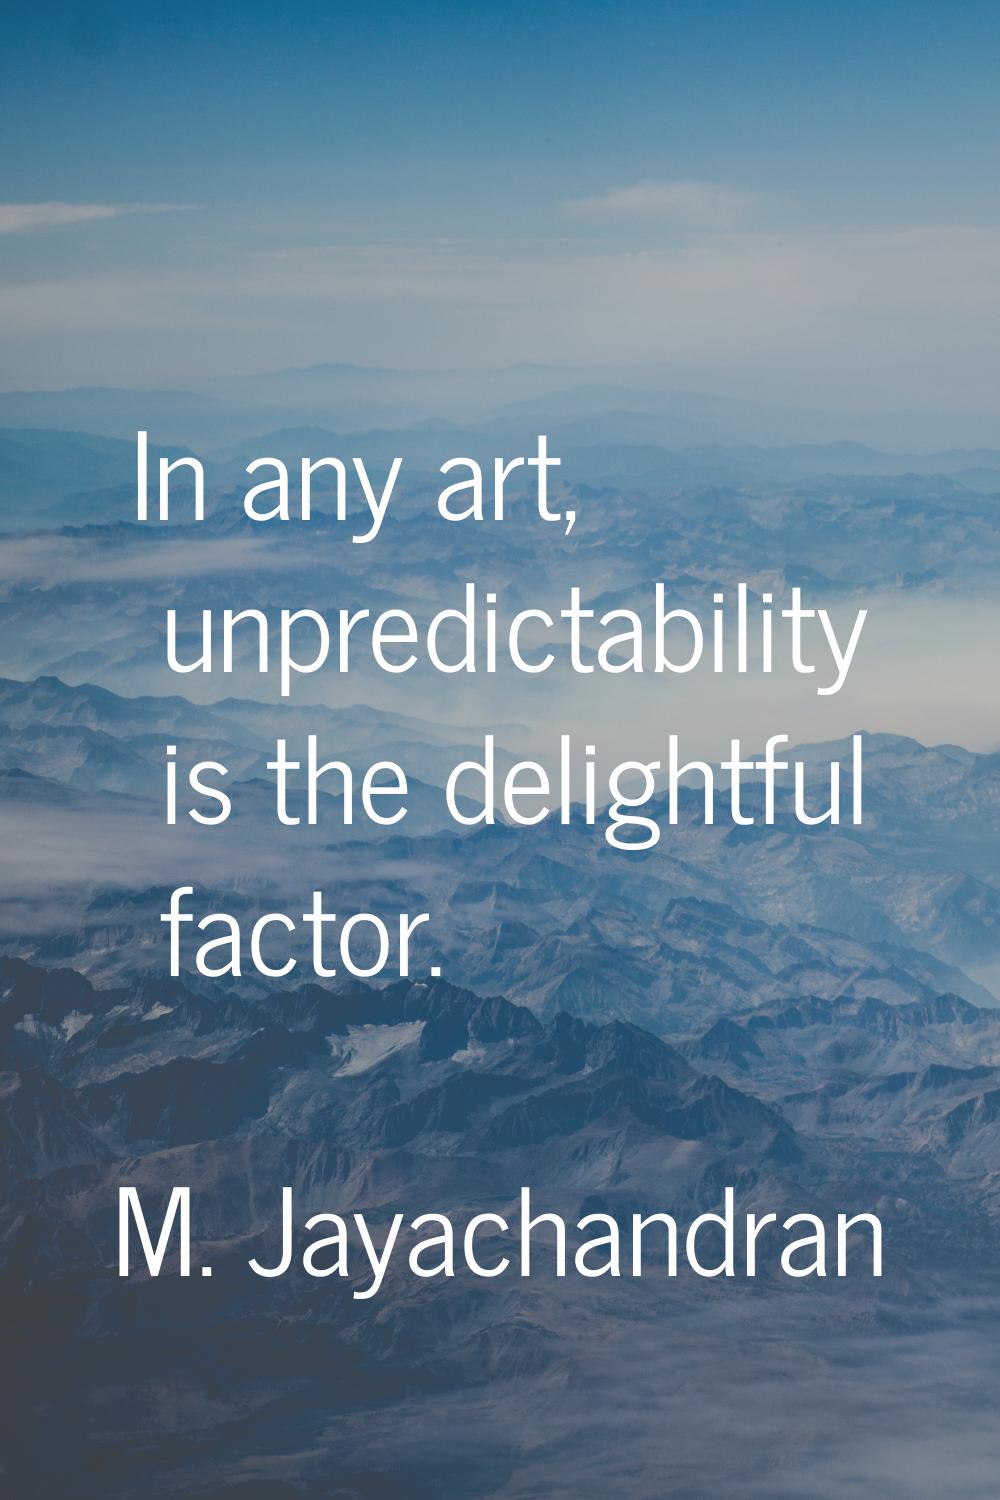 In any art, unpredictability is the delightful factor.